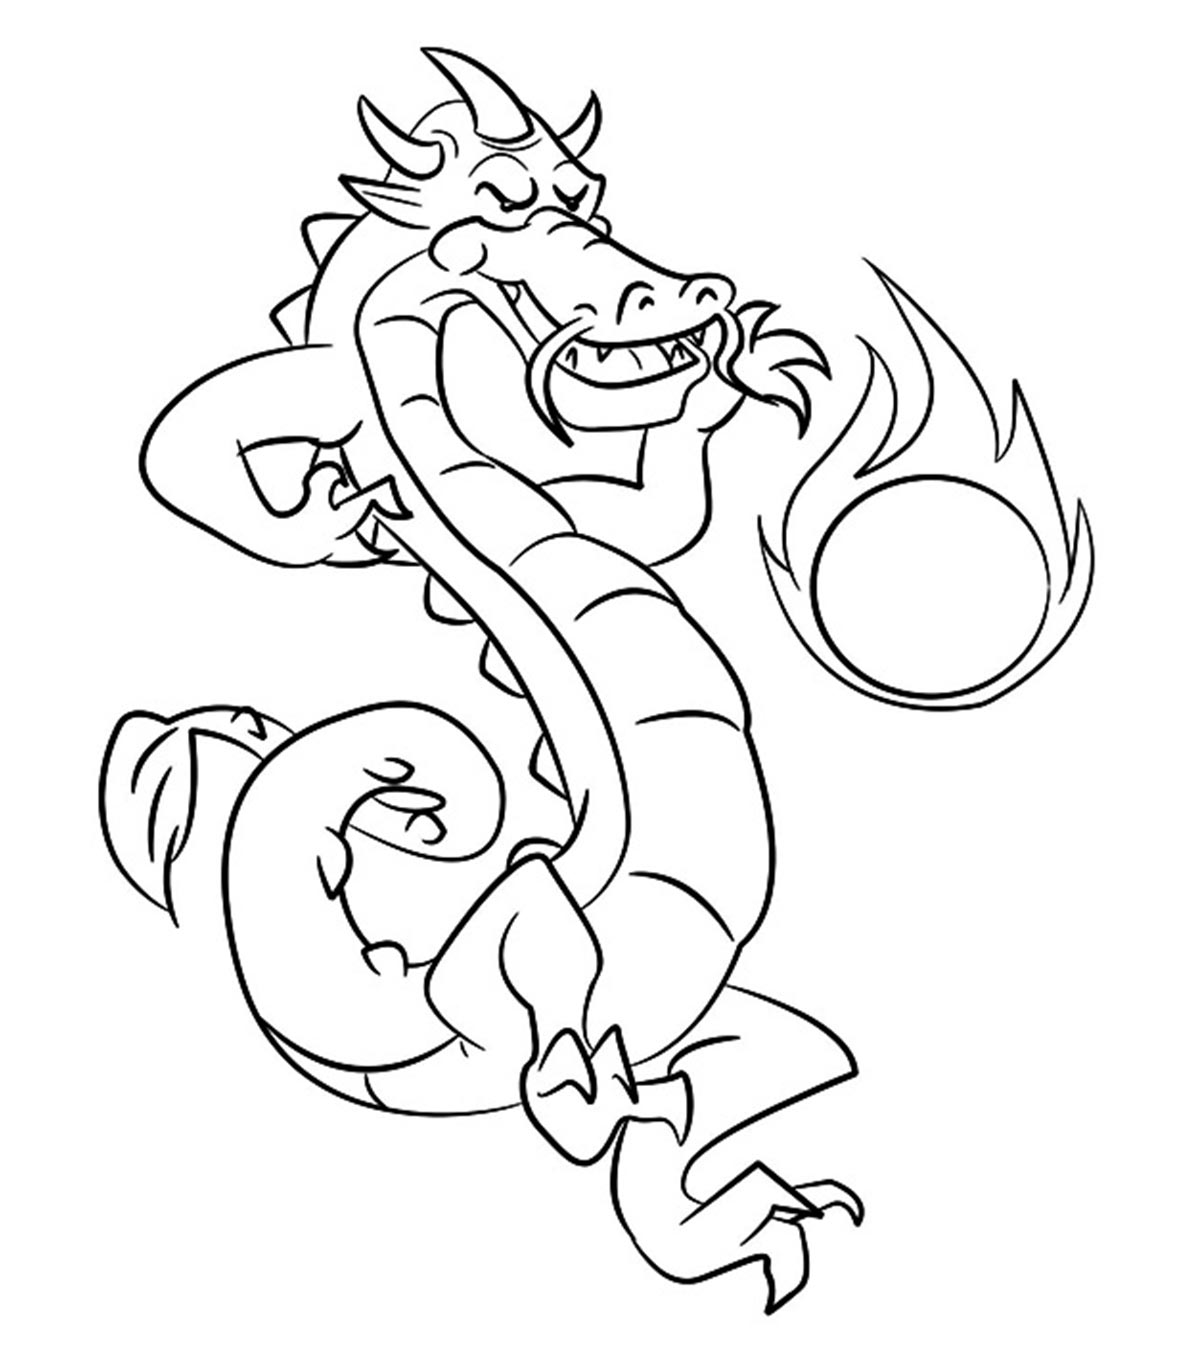 10 Powerful Chinese Dragon Coloring Pages Your Toddler Will Love_image